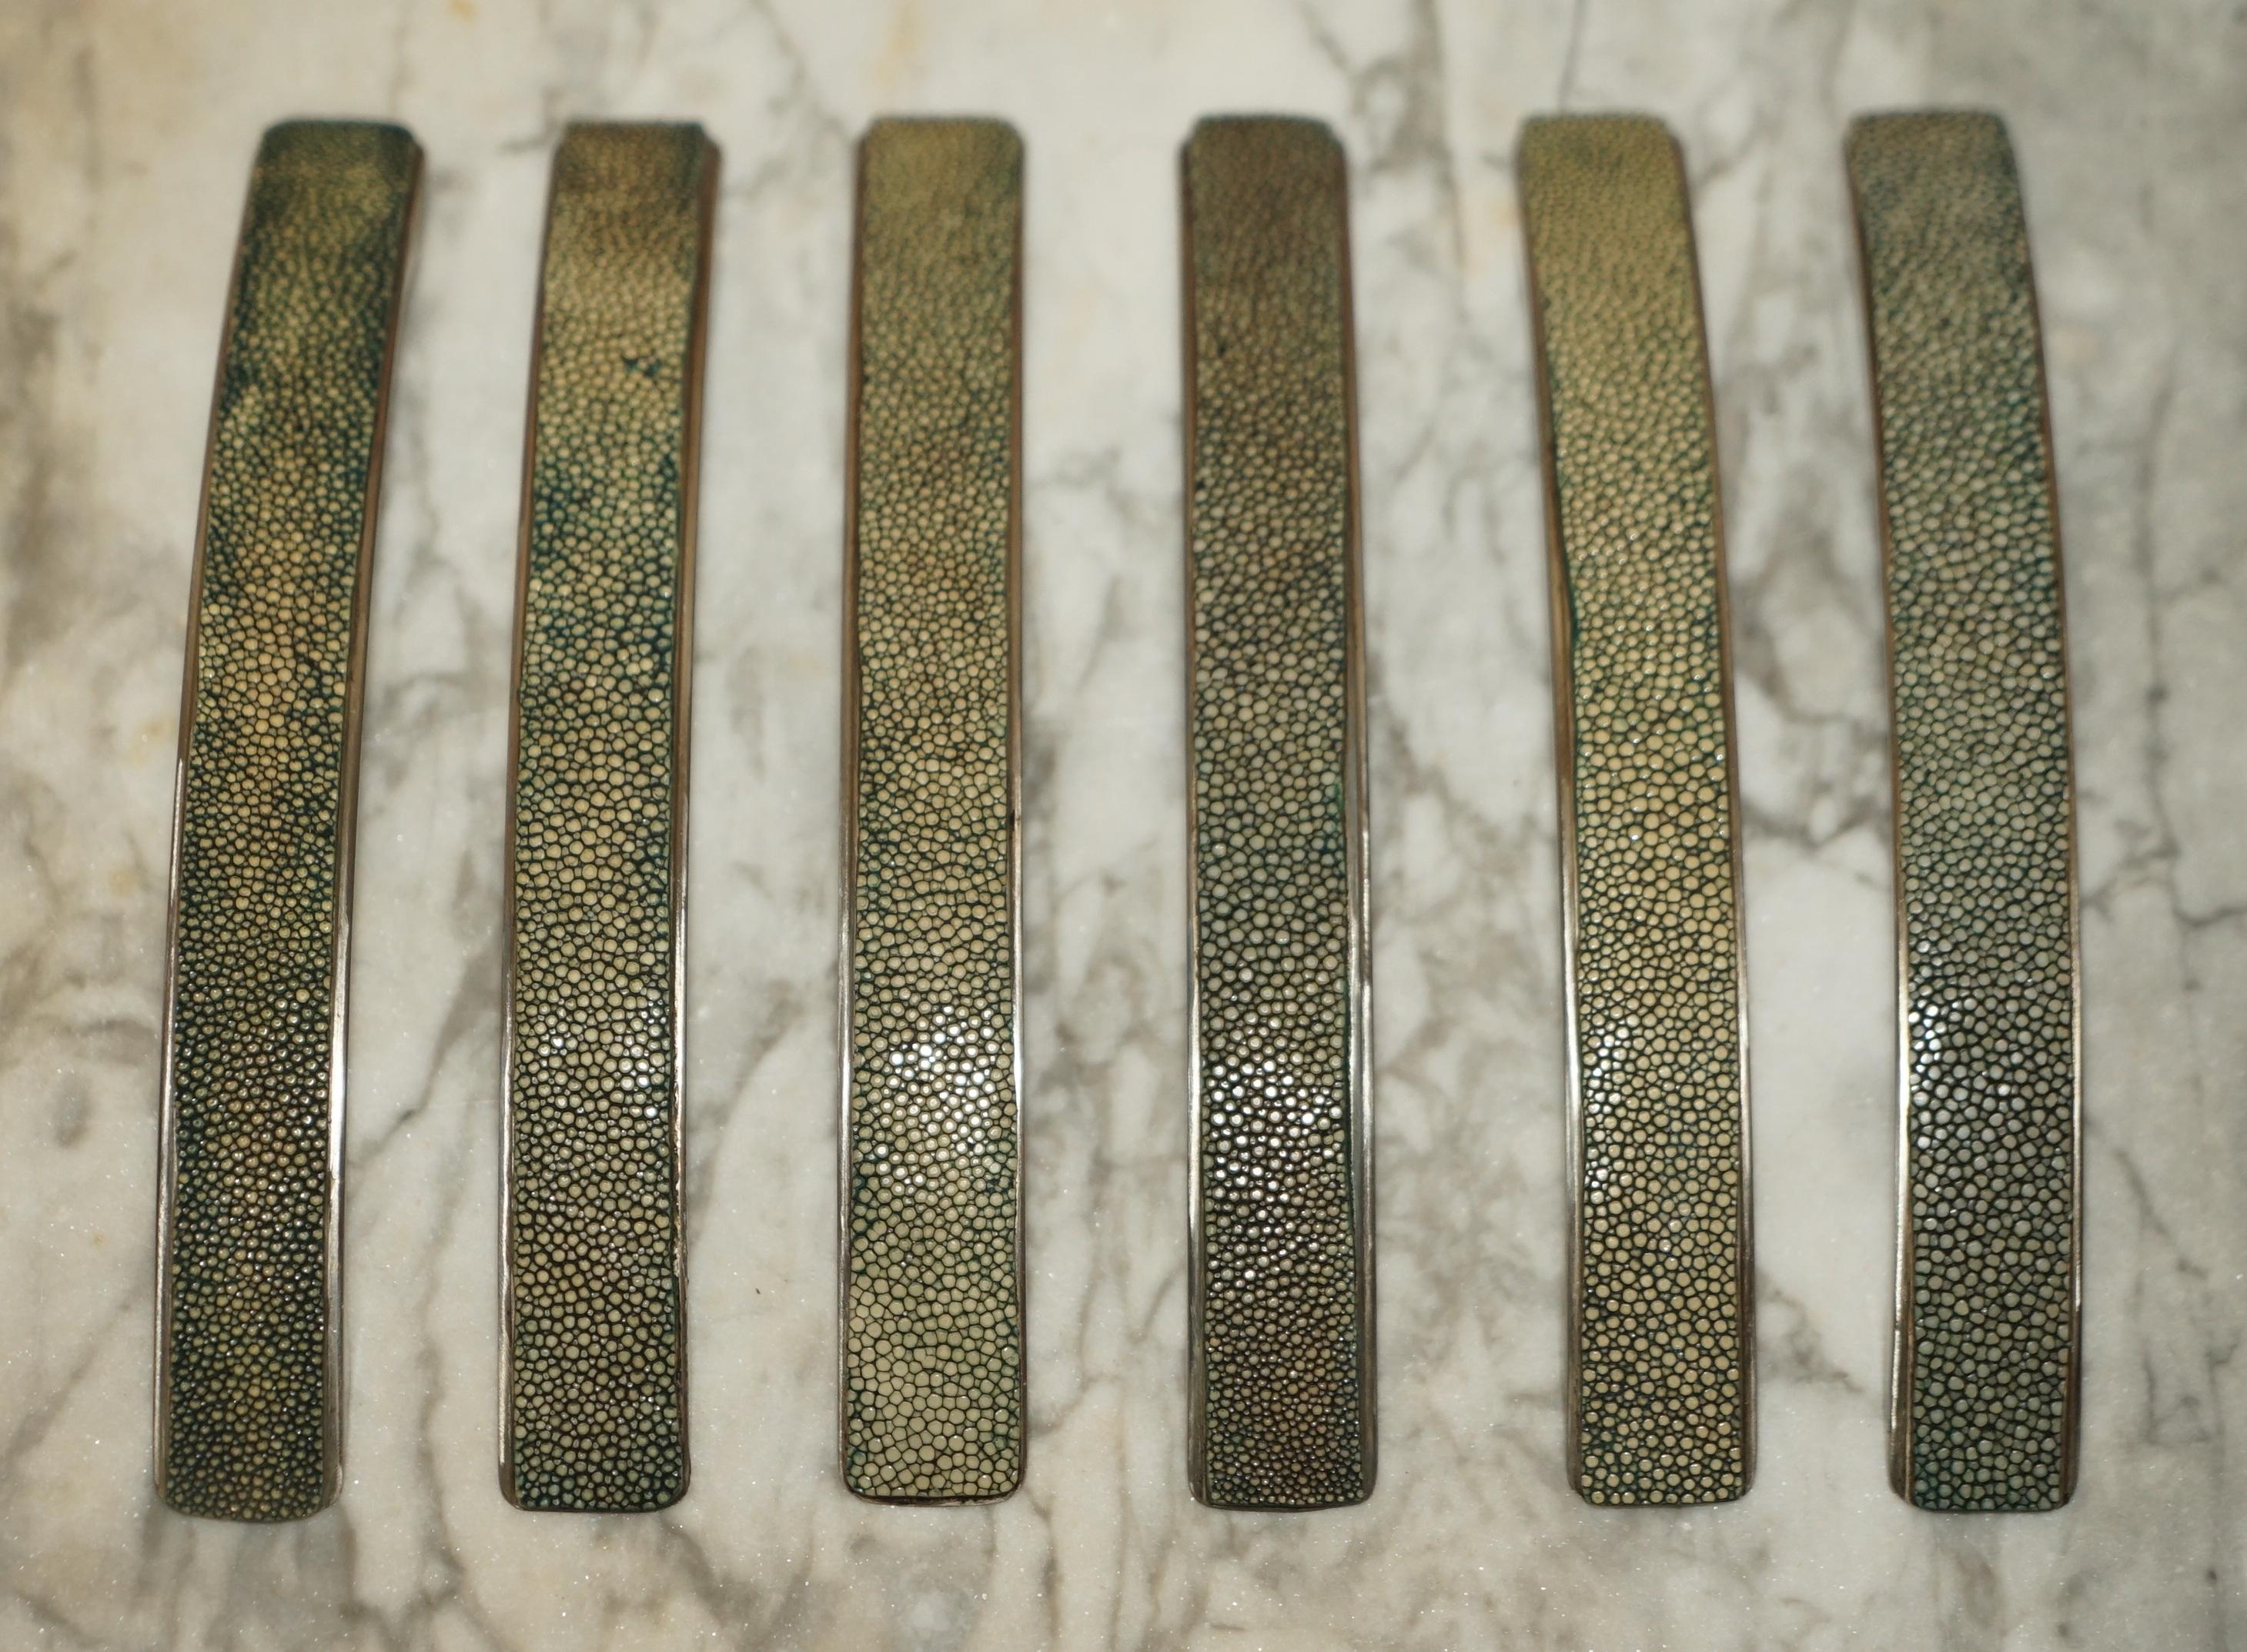 We are delighted to offer for sale this very rare suite of six Shagreen upholstered drawer handles.

Shagreen is super collectable, it is basically manta ray or shark skin.

I bought these with a view to using them on a project but I have gone